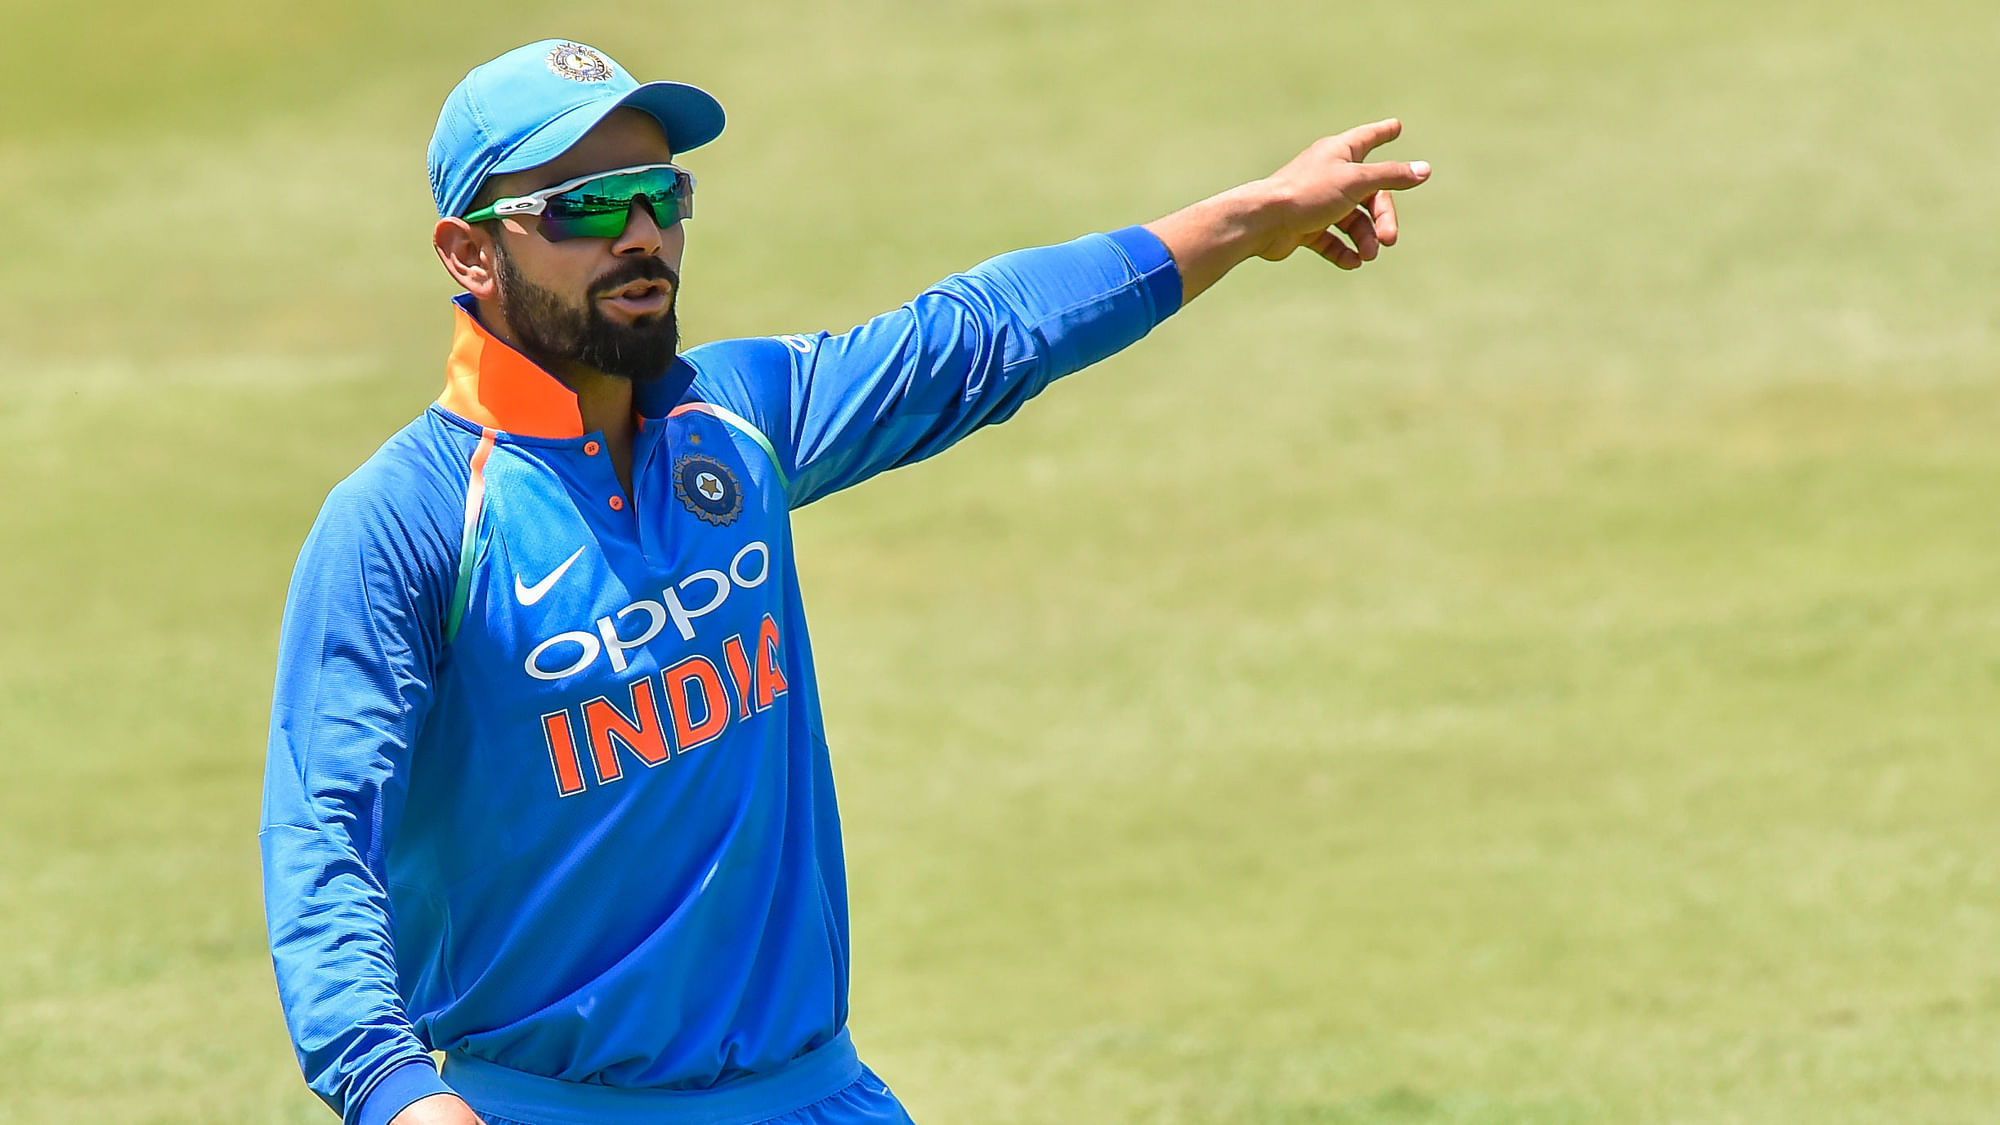 Virat Kohli-led India take on South Africa in the second T20 at Centurion on 21 February.